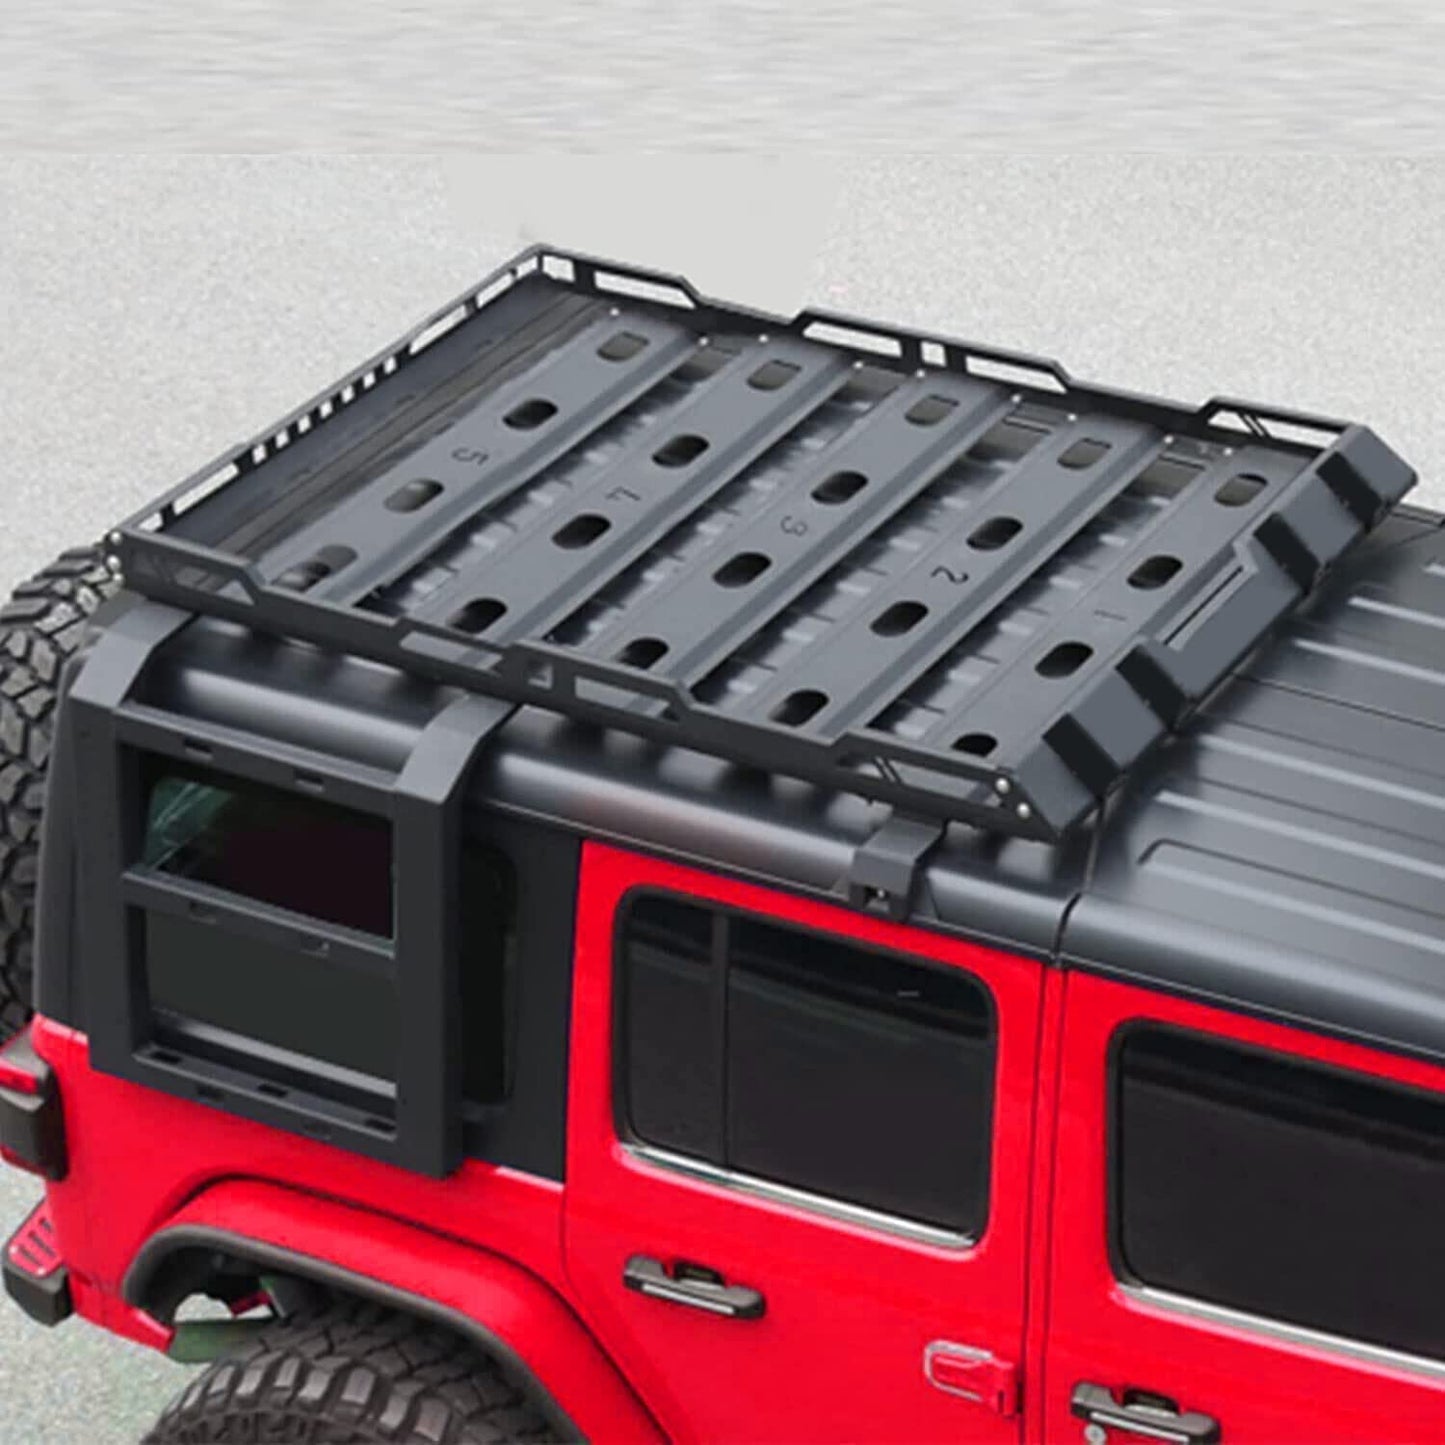 BoardRoad Roof Rack Cargo Basket with Double Ladders 300LB Capacity Fits 2007-2018 Jeep Wrangler JK